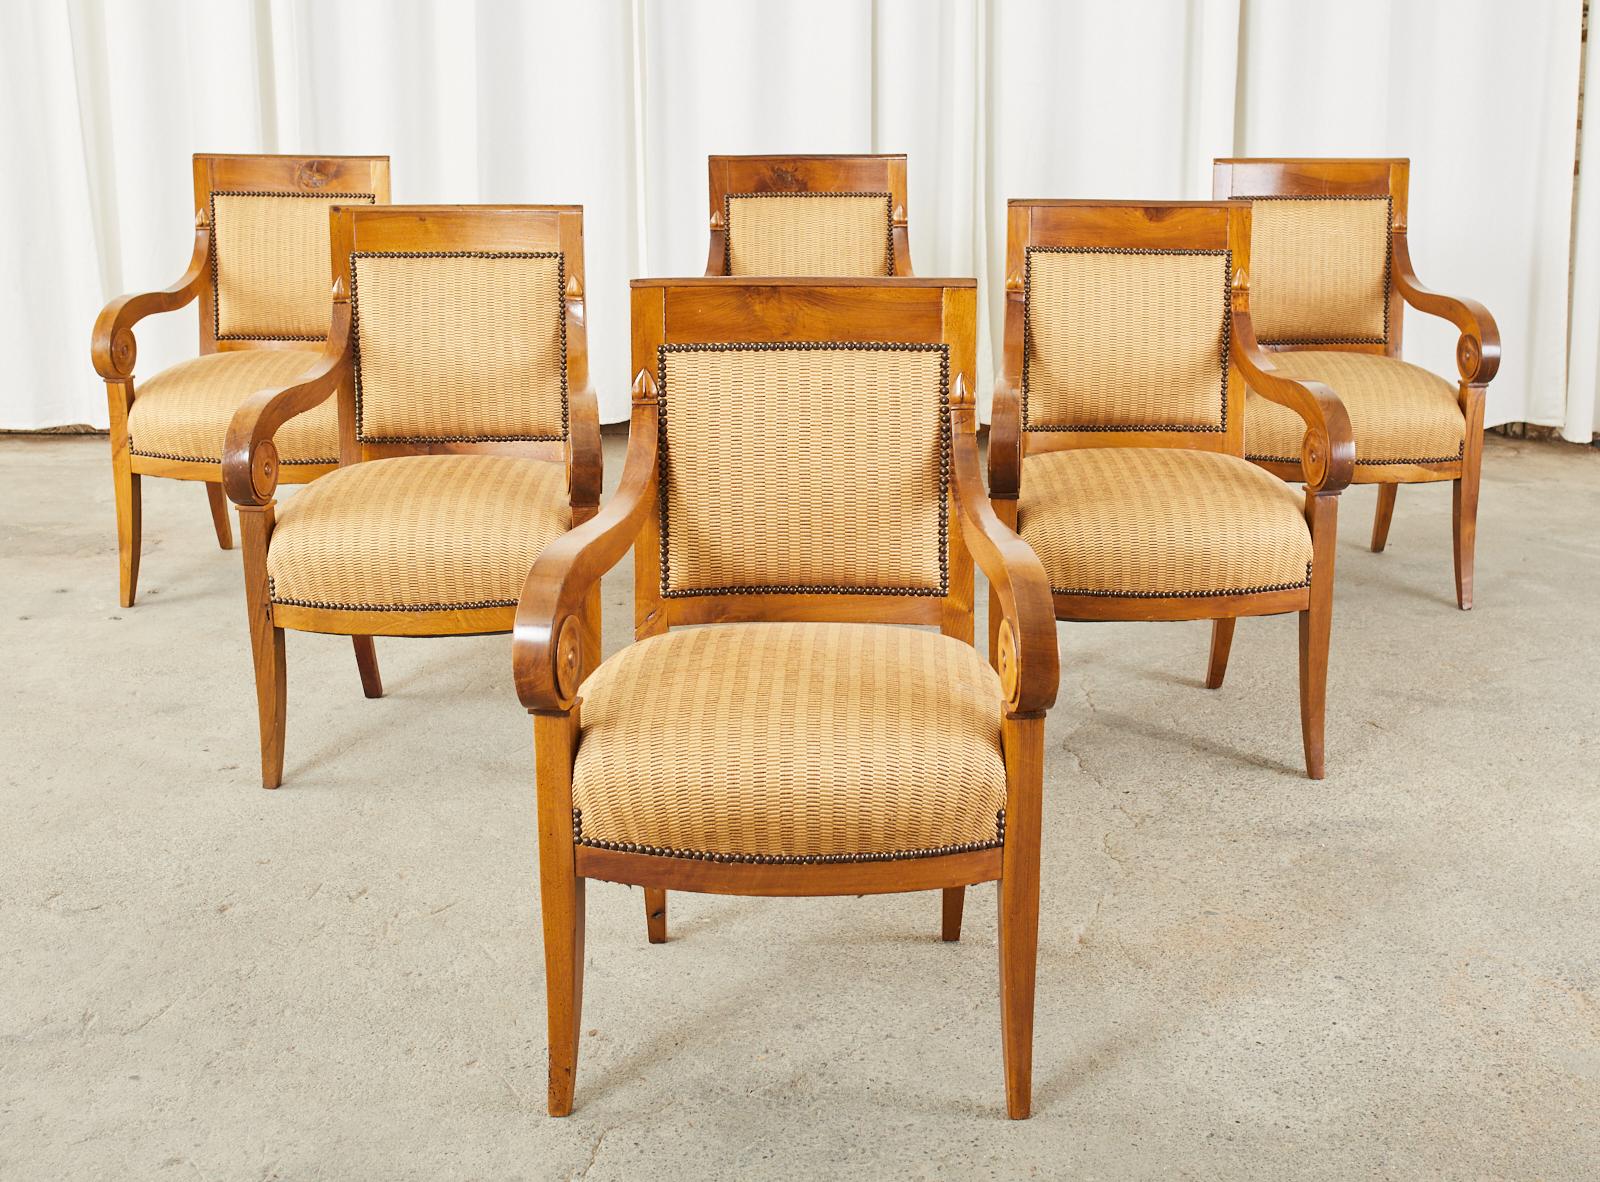 Remarkable 19th century set of French walnut dining chairs or armchairs crafted in the Empire or Biedermeier taste. The chairs feature thick walnut frames that showcase the dramatic grain patterns of the wood with a beautifully aged patina. The